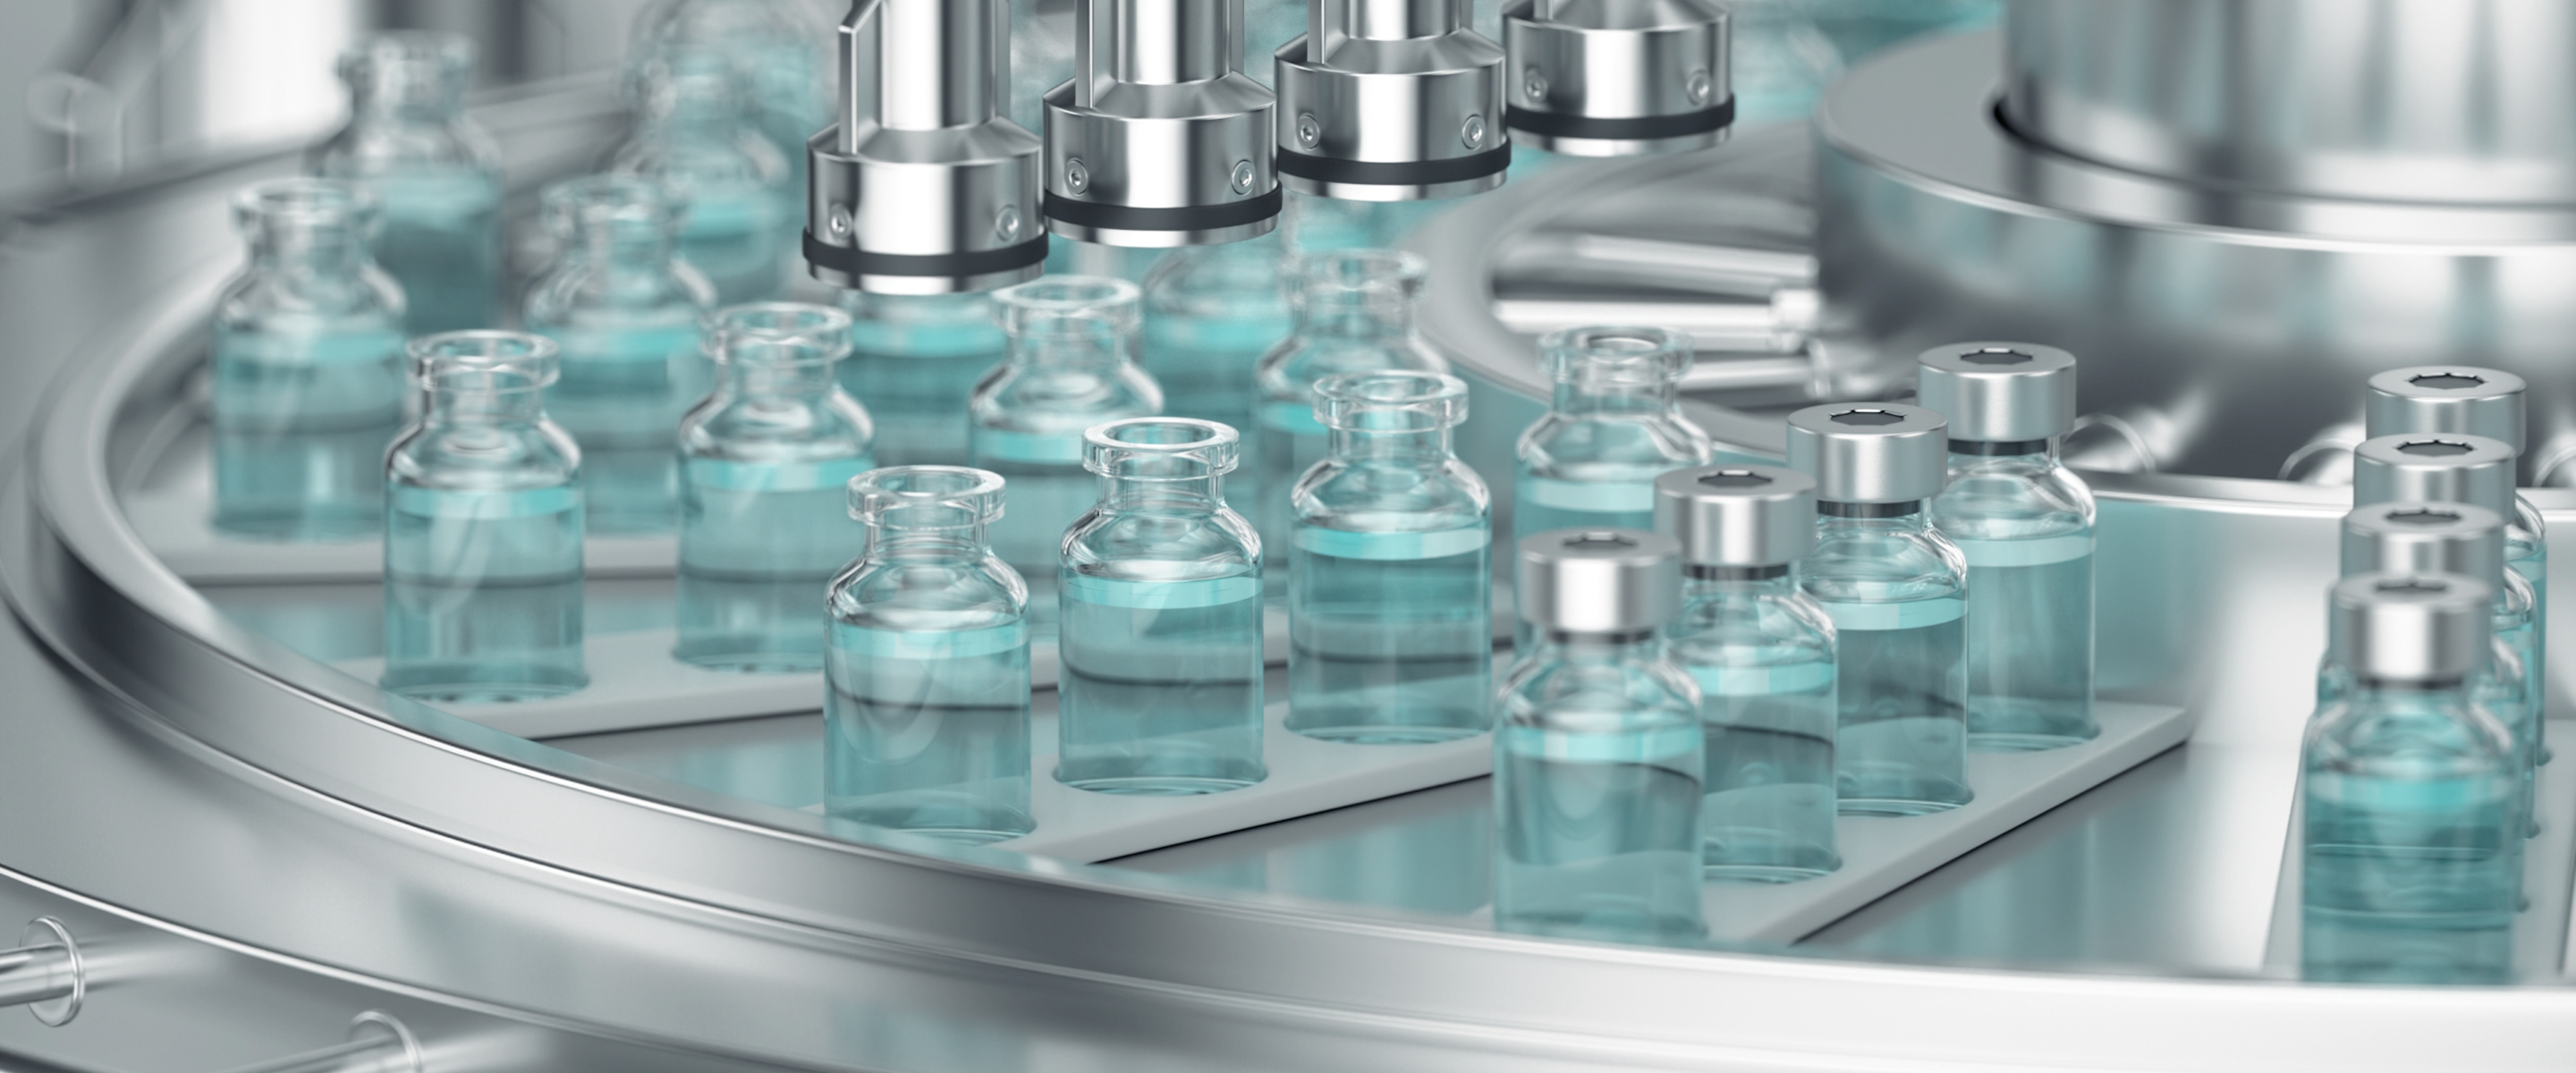 Background of pharmaceutical production with glass bottles with clear liquid on automatic conveyor line